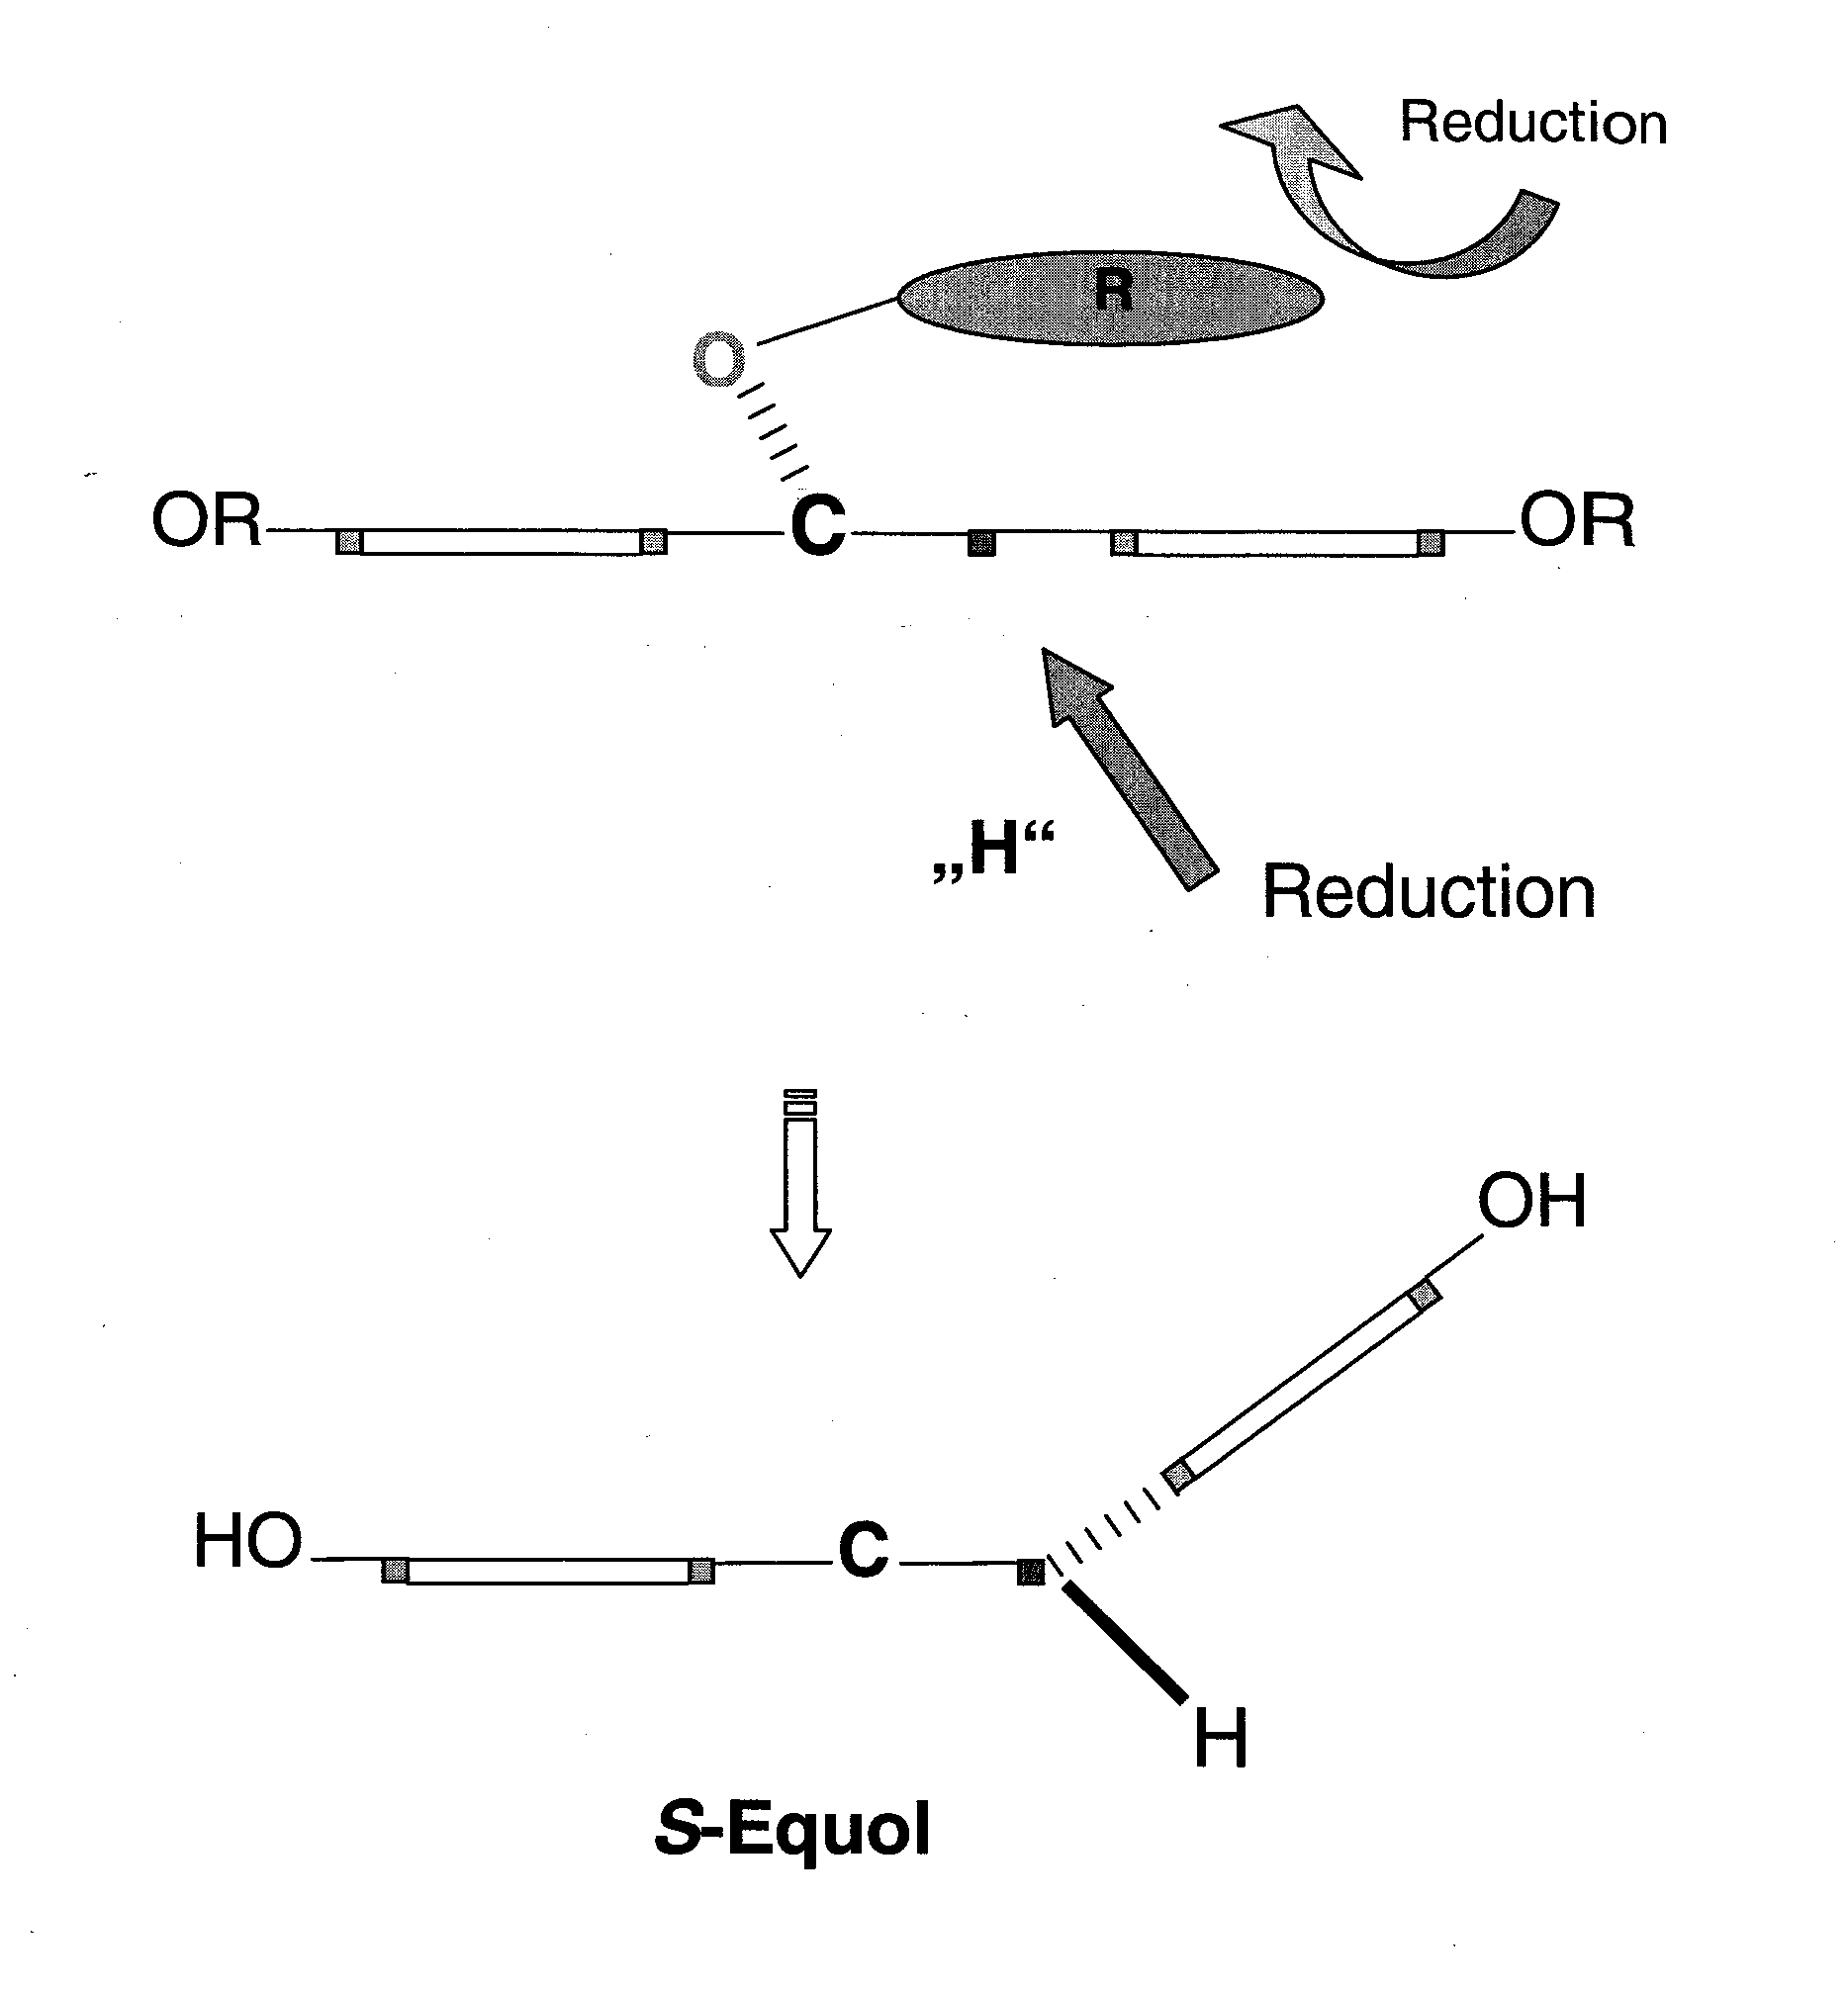 Synthesis of equol